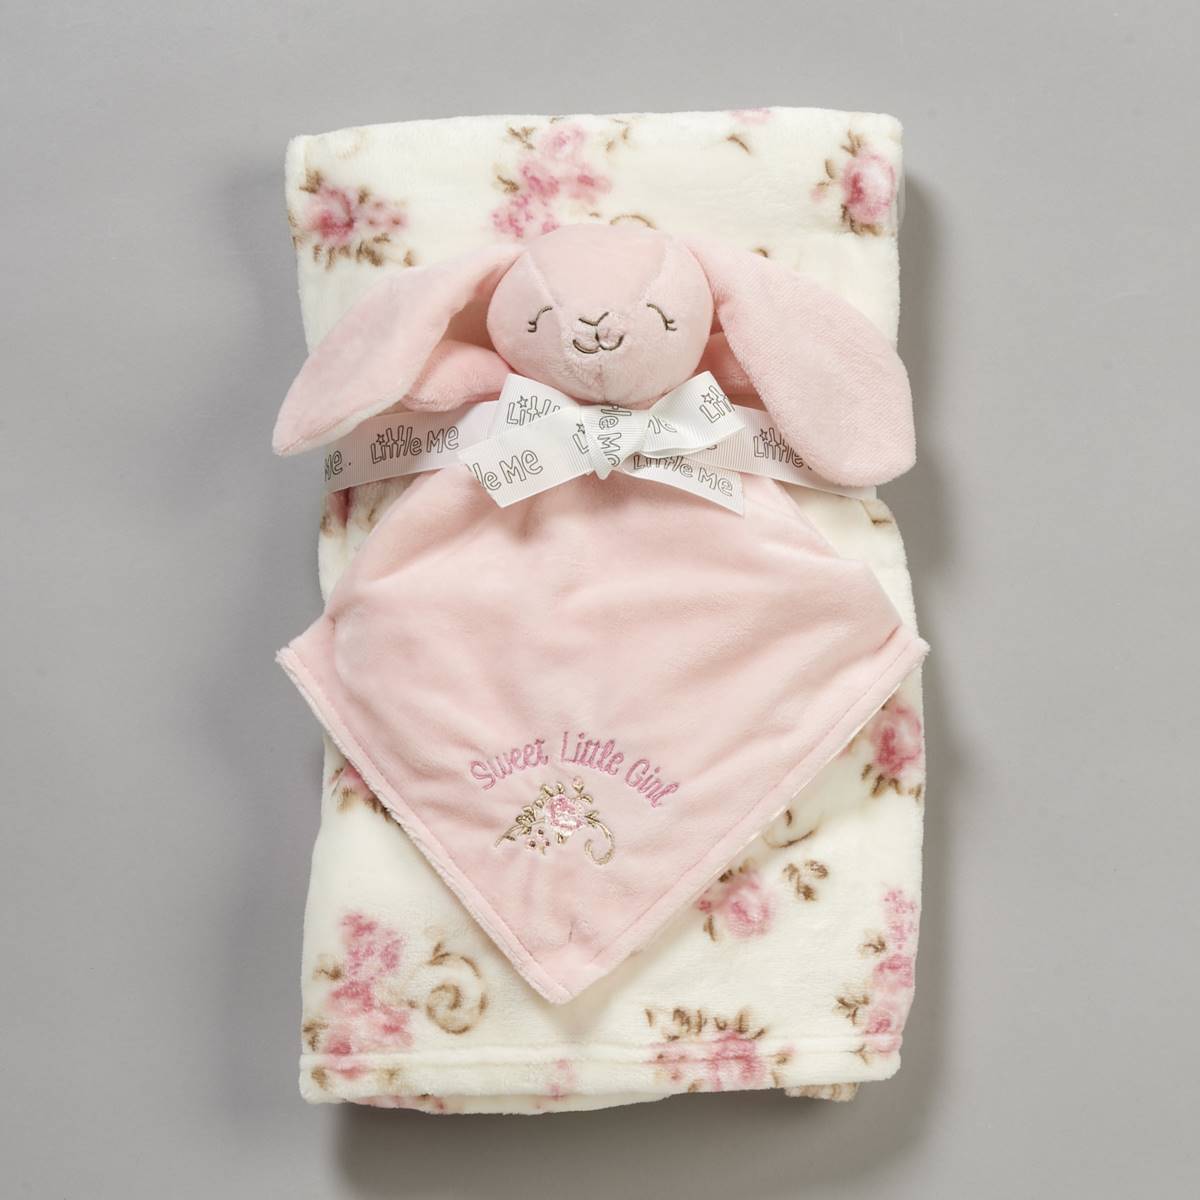 Little Me Floral Blanket W/Bunny Toy Plush